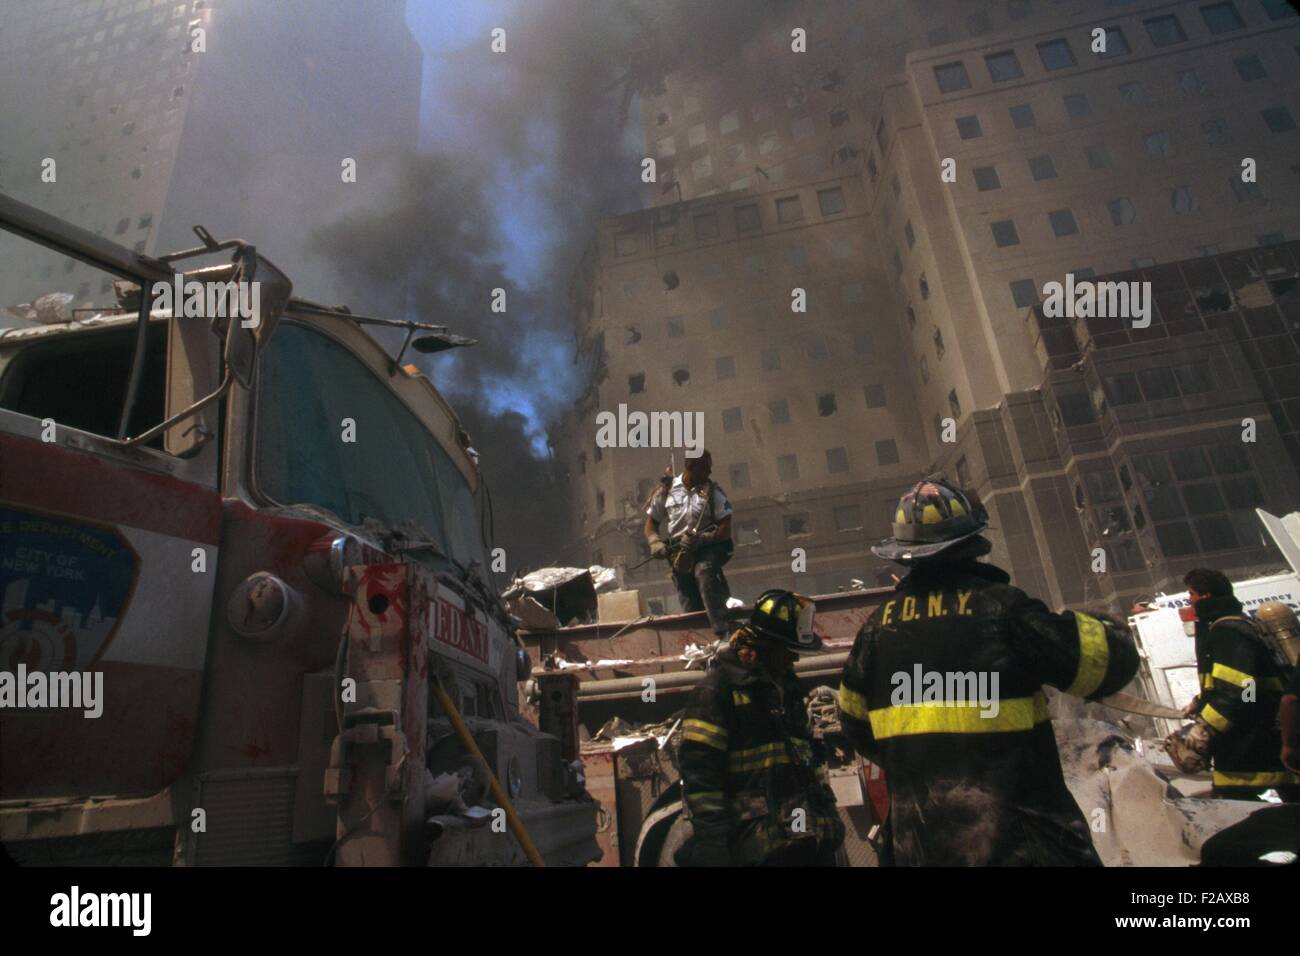 Fire fighters amid debris following September 11th terrorist attack on World Trade Center. In the background are damaged buildings of the World Financial Center, New York City, Sept. 11, 2001. (BSLOC 2015 2 44) Stock Photo